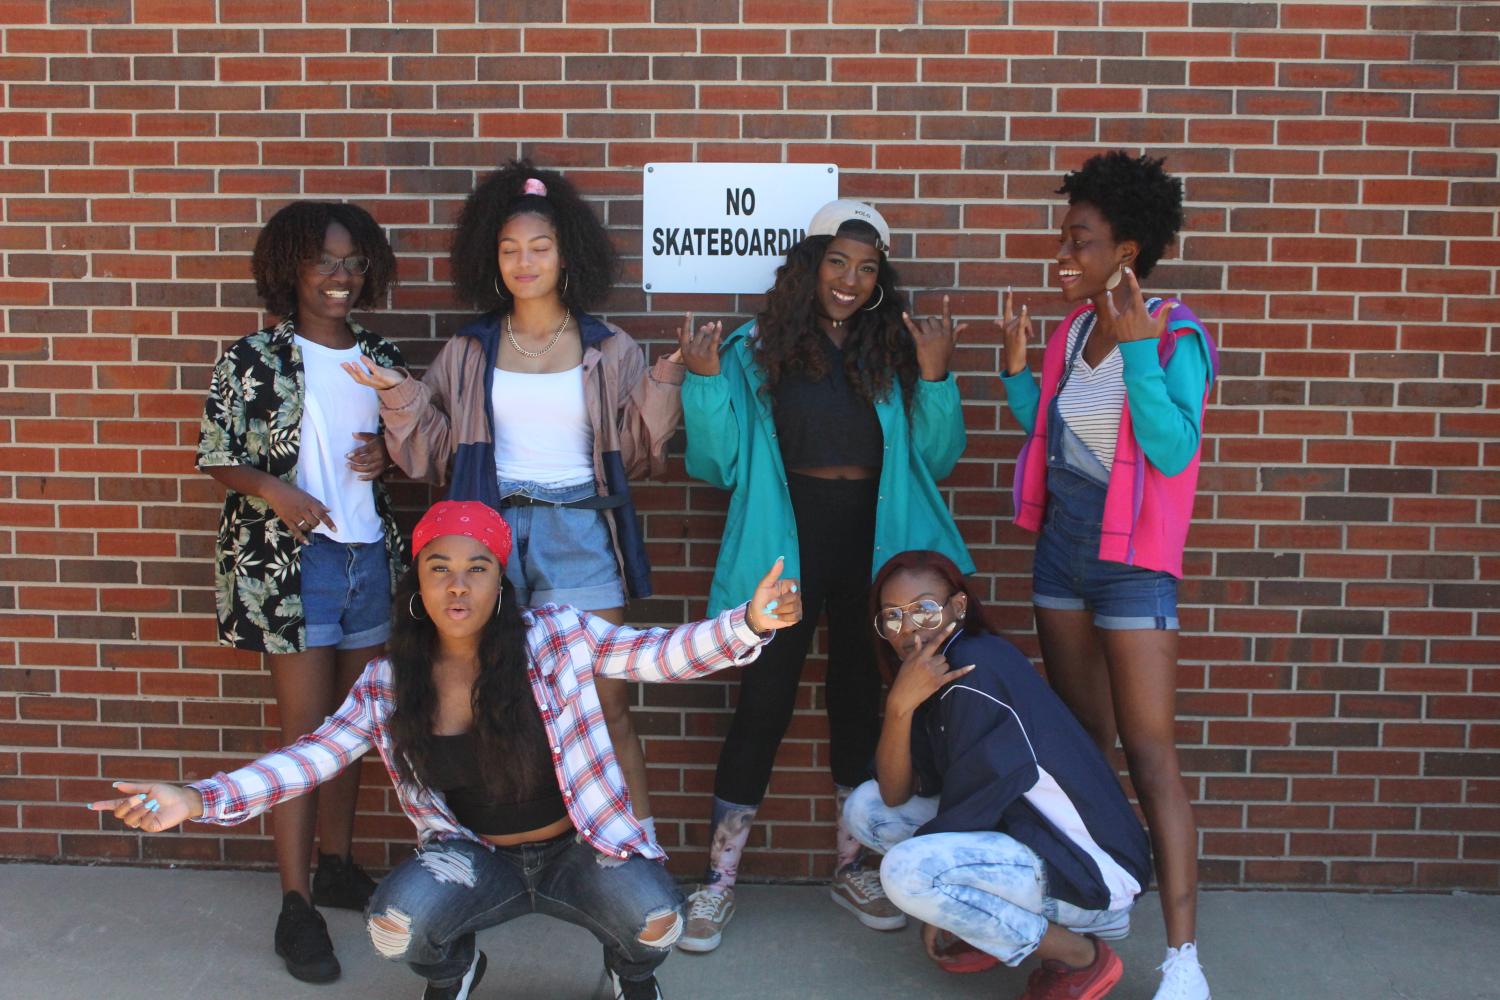 Seniors all over school dress up in colorful windbreakers and flannels for flashback/90’s day to celebrate senior week. With 90s fashion becoming more of a trend, students outfits were similar to an everyday outfit.